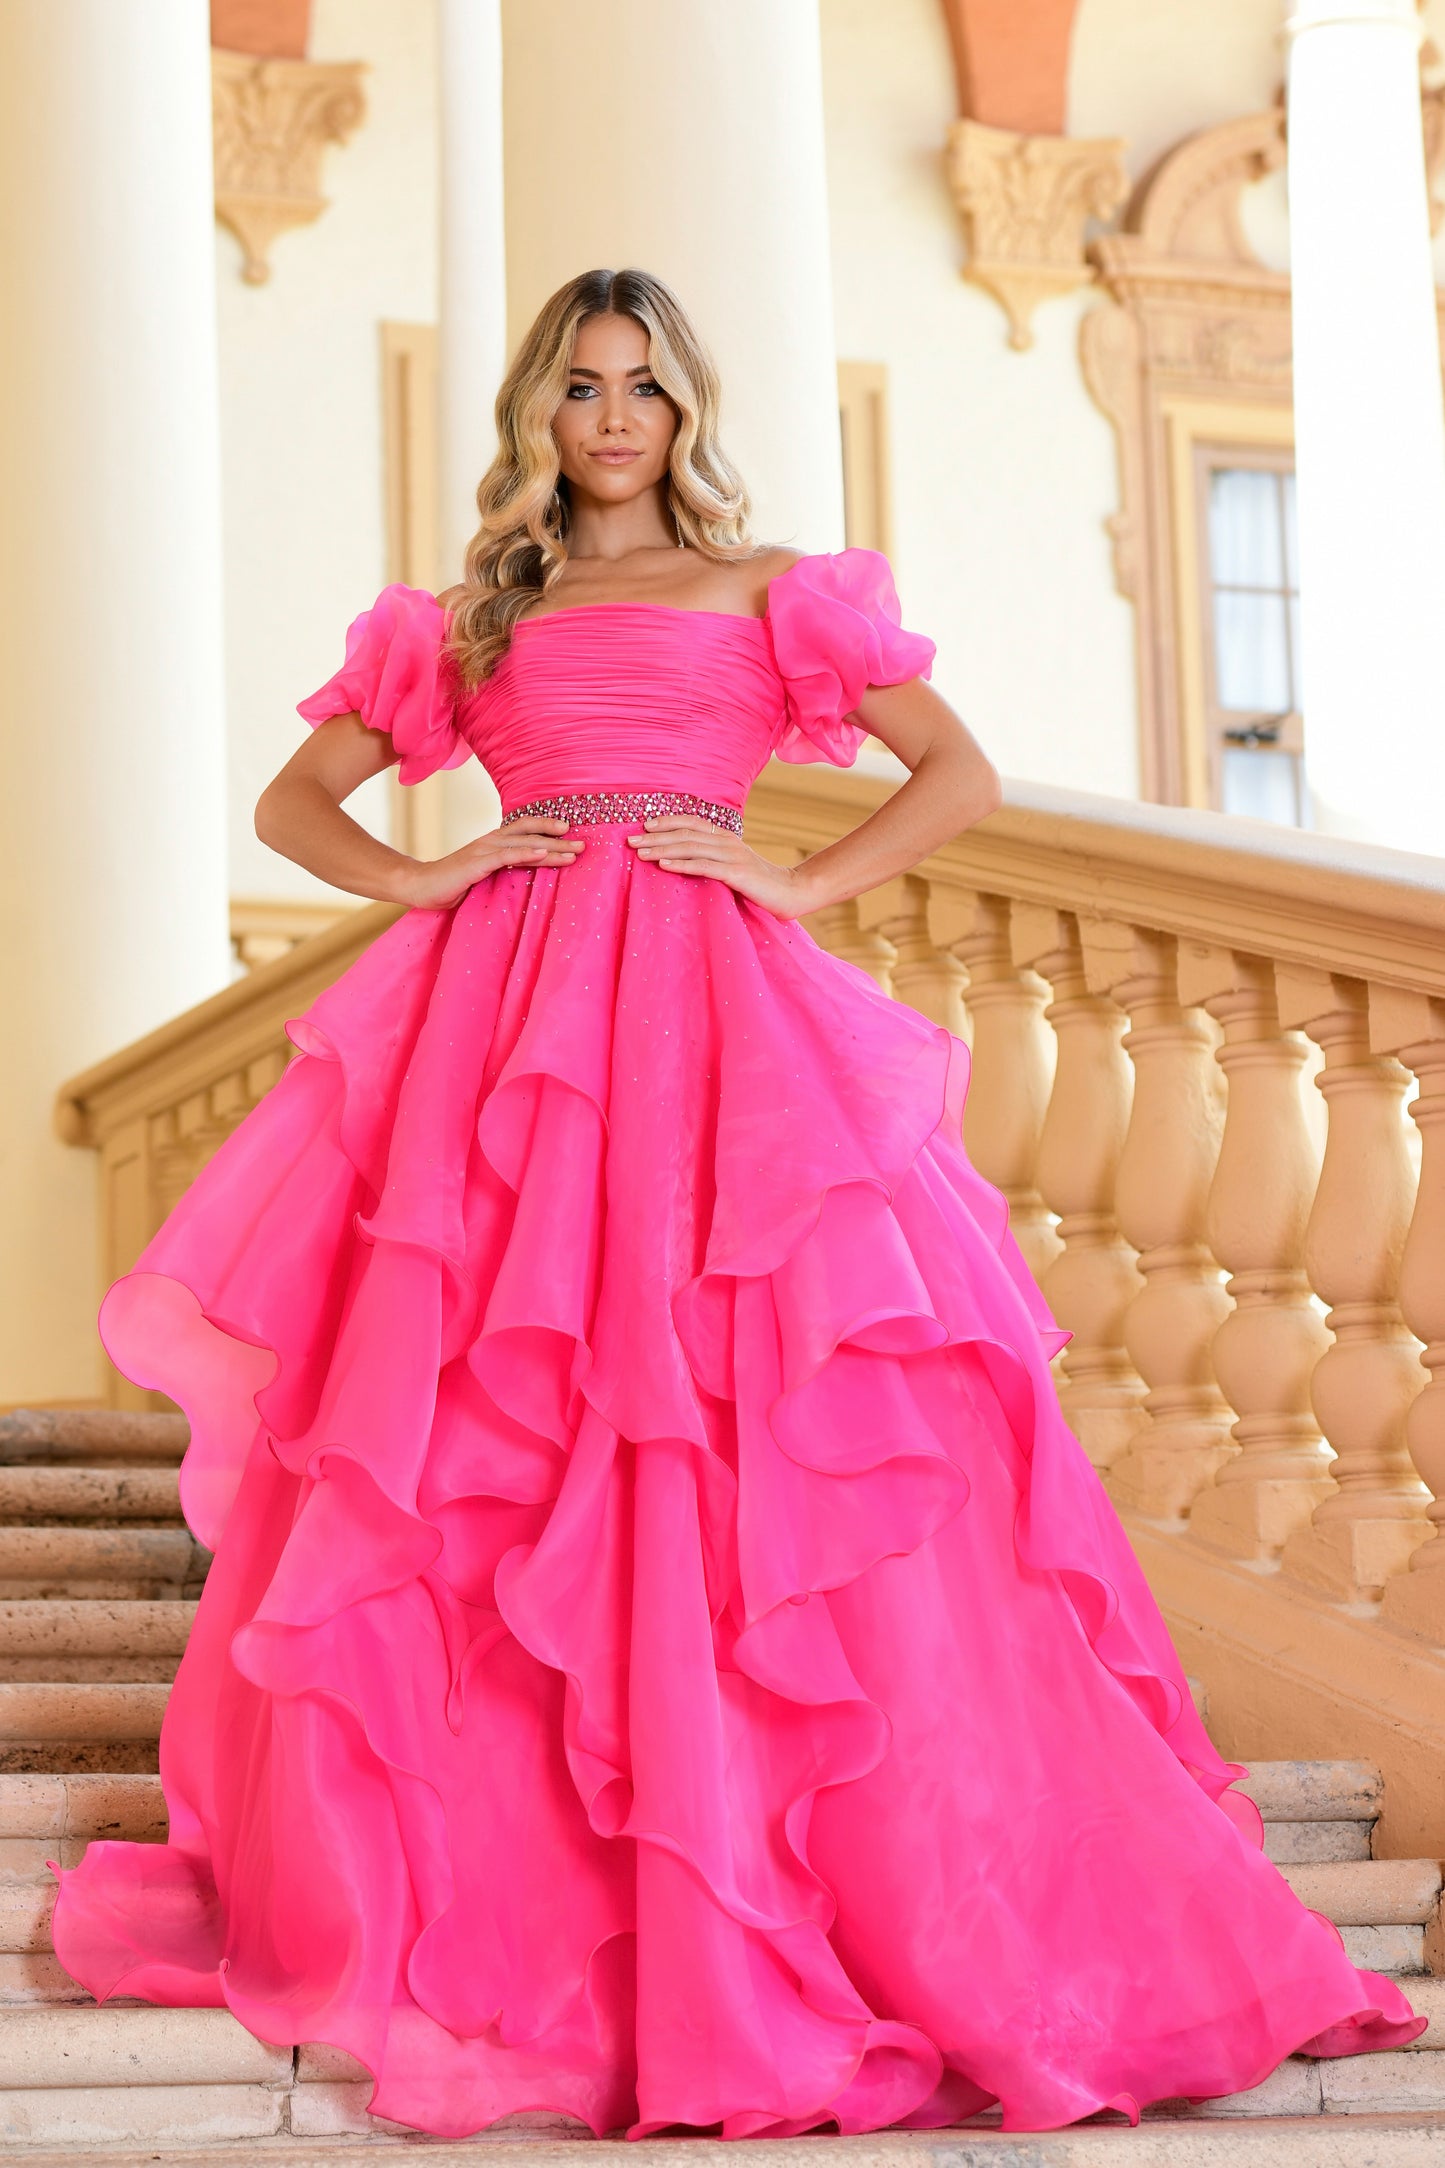 Introducing the Ava Presley 28571 Dress, perfect for any pageant or special occasion. It features a long ruffle ballgown style along with an off-the-shoulder, puff sleeve design. Crafted from a premium quality fabric, this gown is lightweight, durable, and provides a comfortable fit. Get ready to sparkle and shine in this gorgeous dress.  Sizes: 00-18  Colors: Black, Fuchsia, Light Blue, Red, Royal, White, Orchid